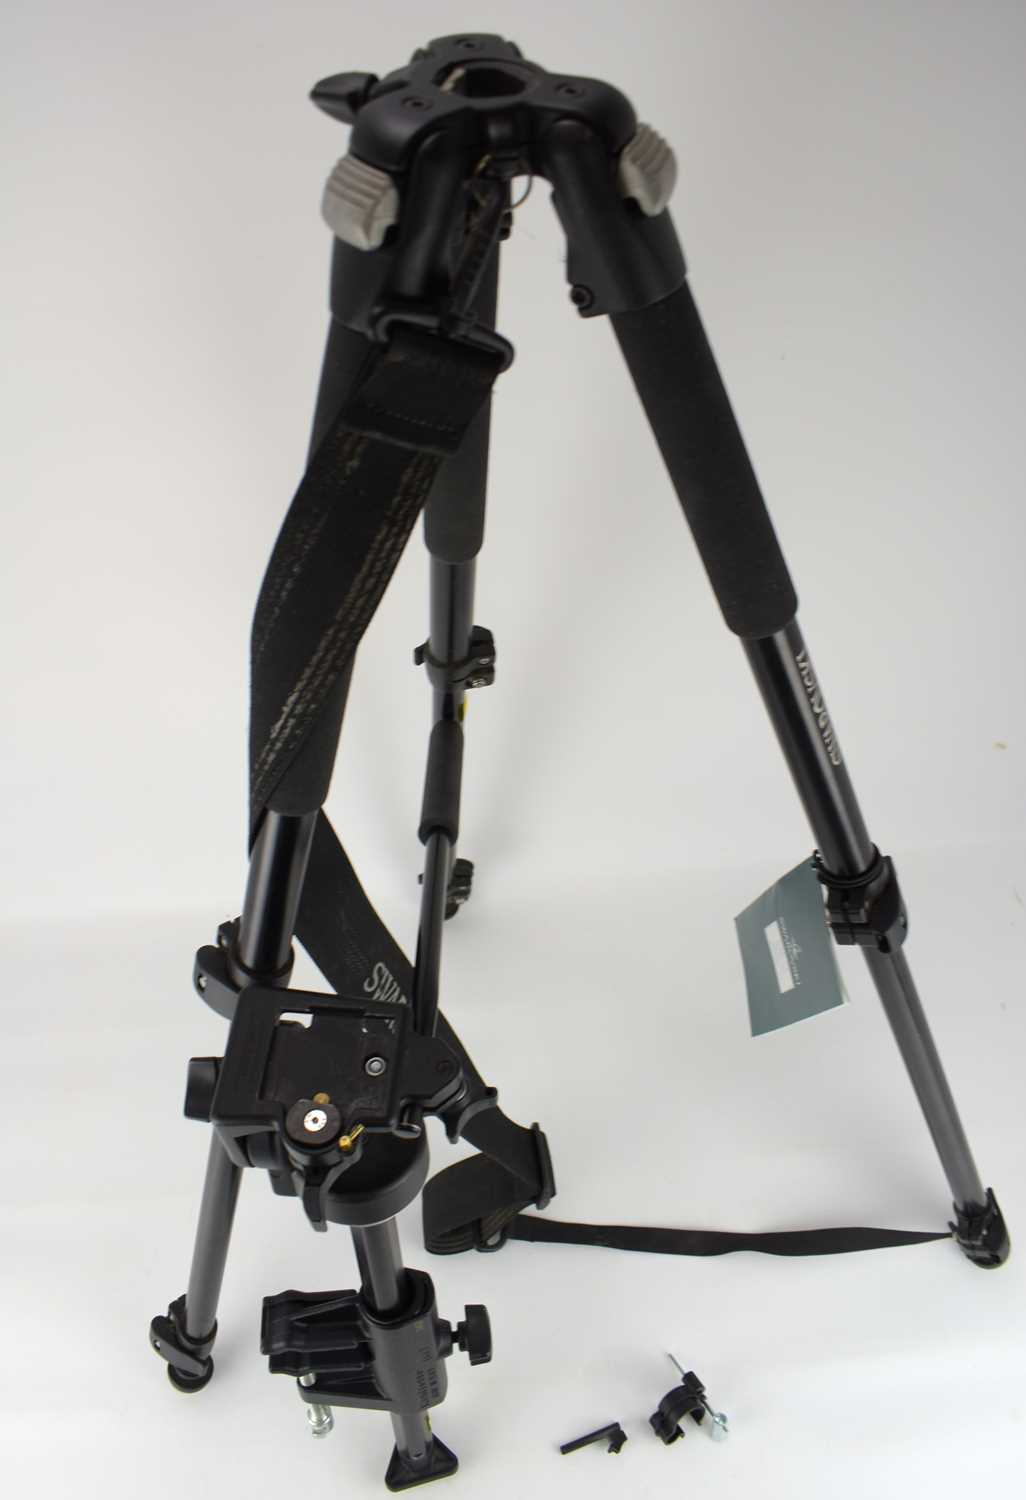 SWAROVSKI OPTIK; a professional tripod and head assembly for spotting scope and cameras, with - Image 3 of 5